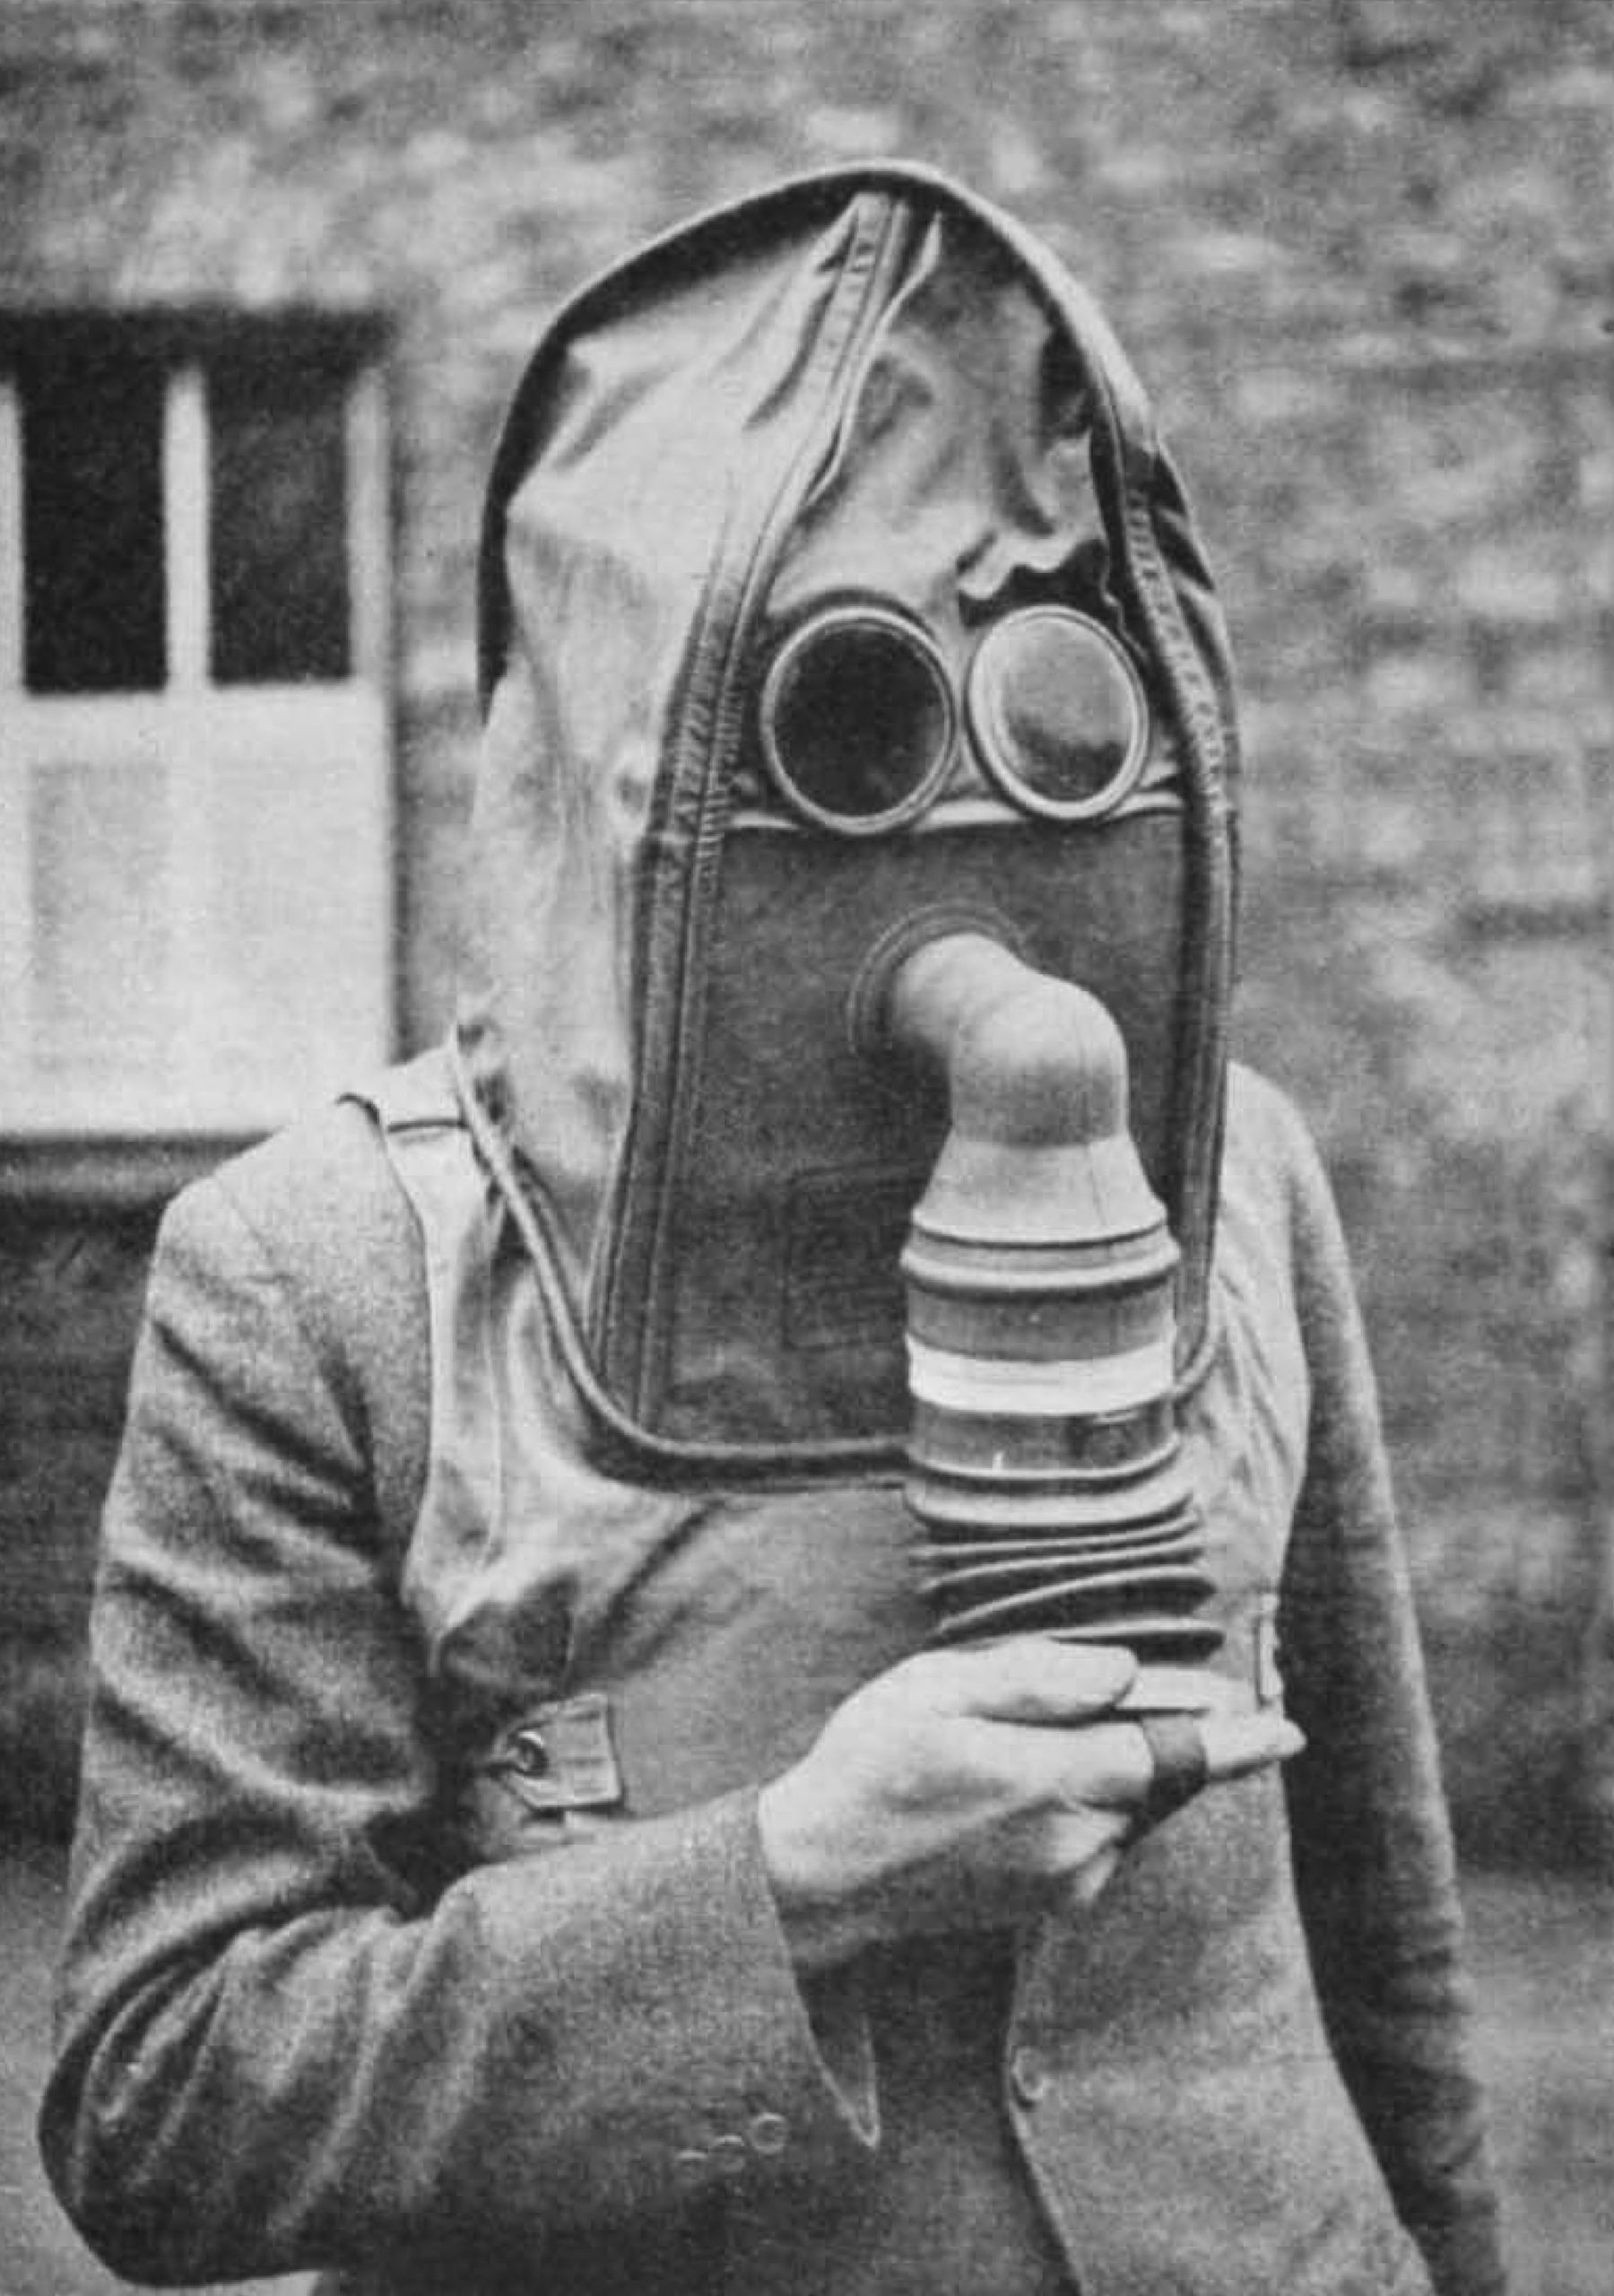 Civil Defence Manual of Basic Training: Basic Chemical Warfare (1949). Helmet respirator, showing the wearer operating the bellows